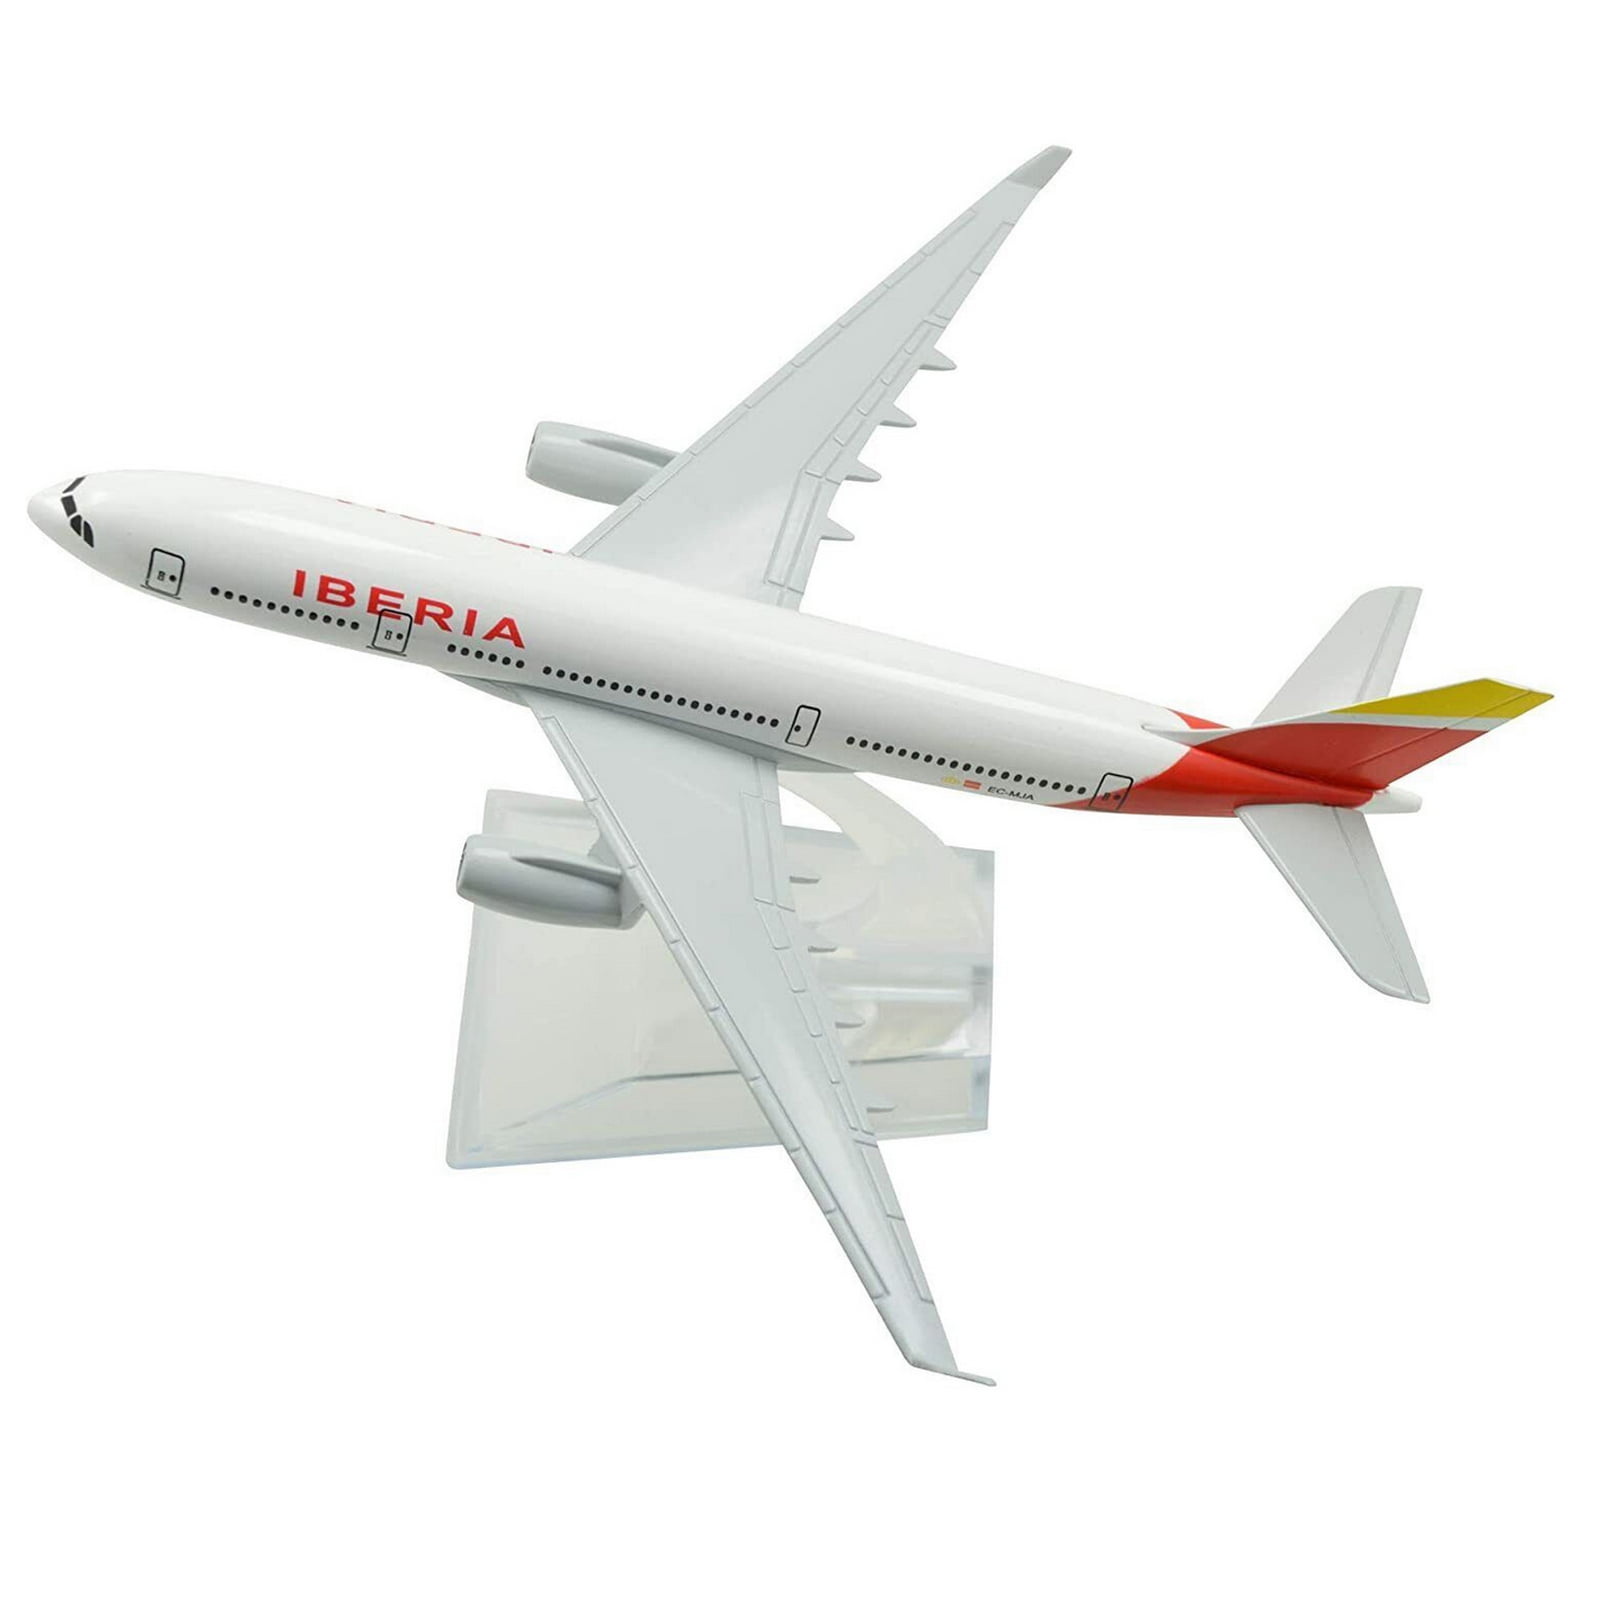 Buy 4mm Balsawood India 4mm Quality Imported plane models